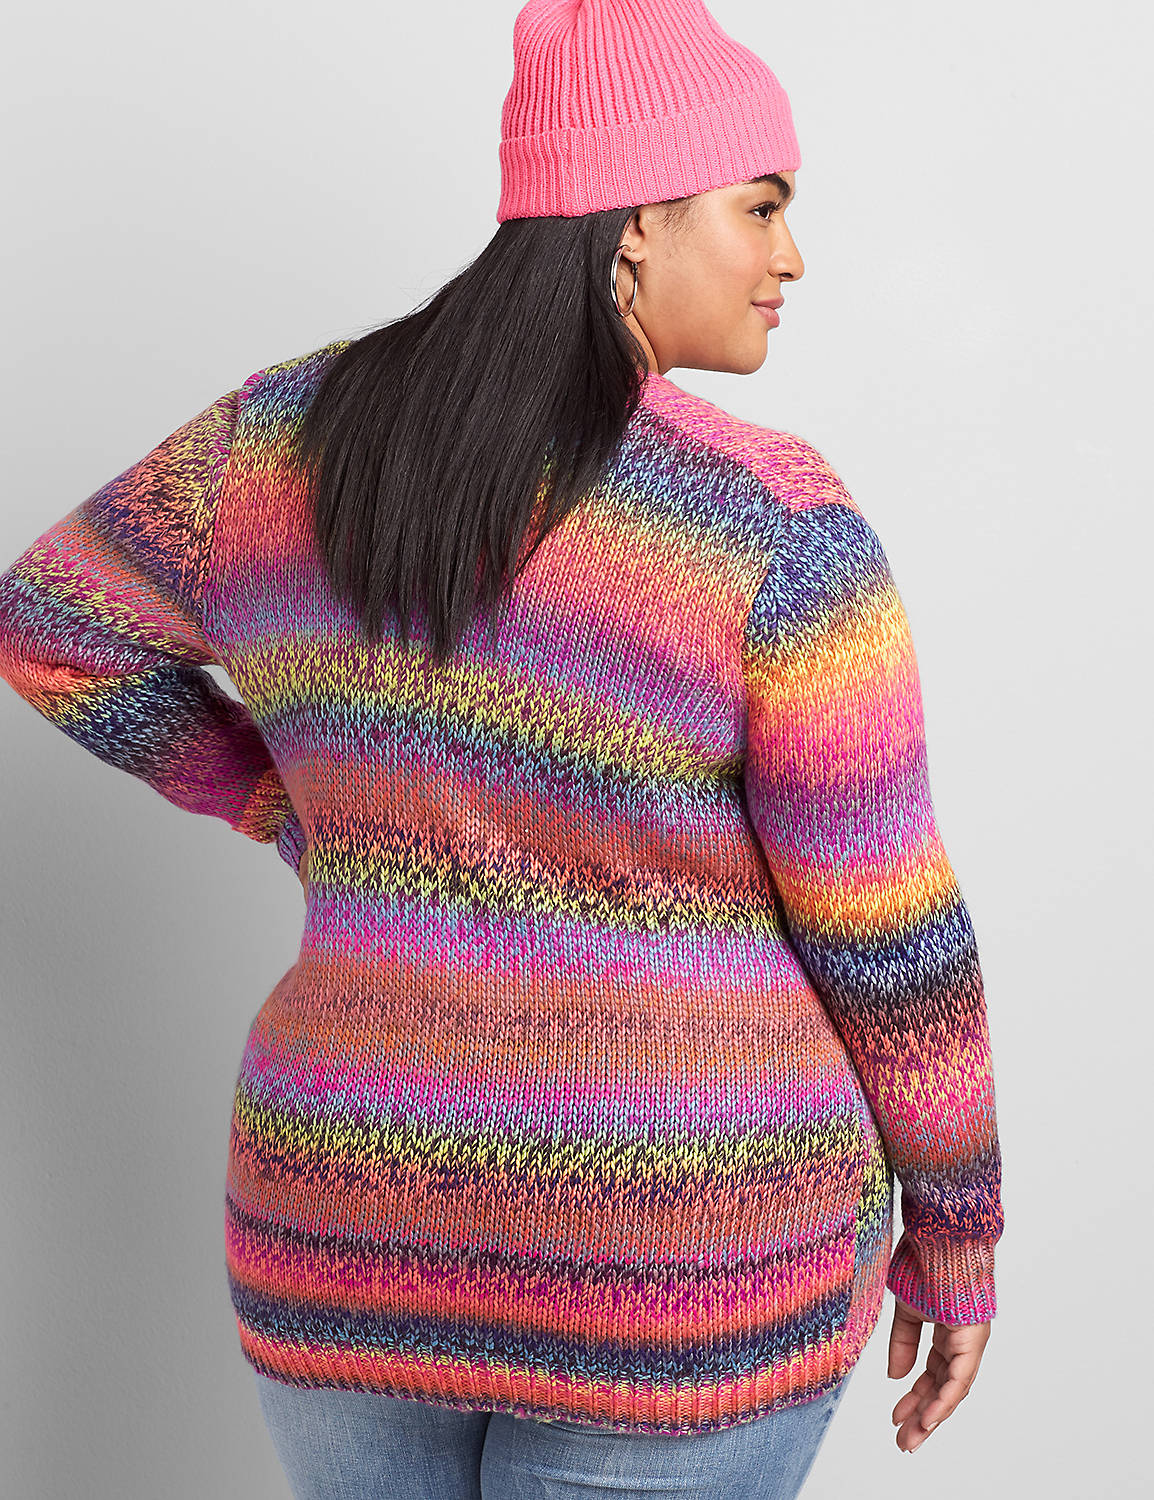 Long Sleeve Clean Front Overpiece in Rainbow Spacedye 1118019:Multi:14/16 Product Image 2